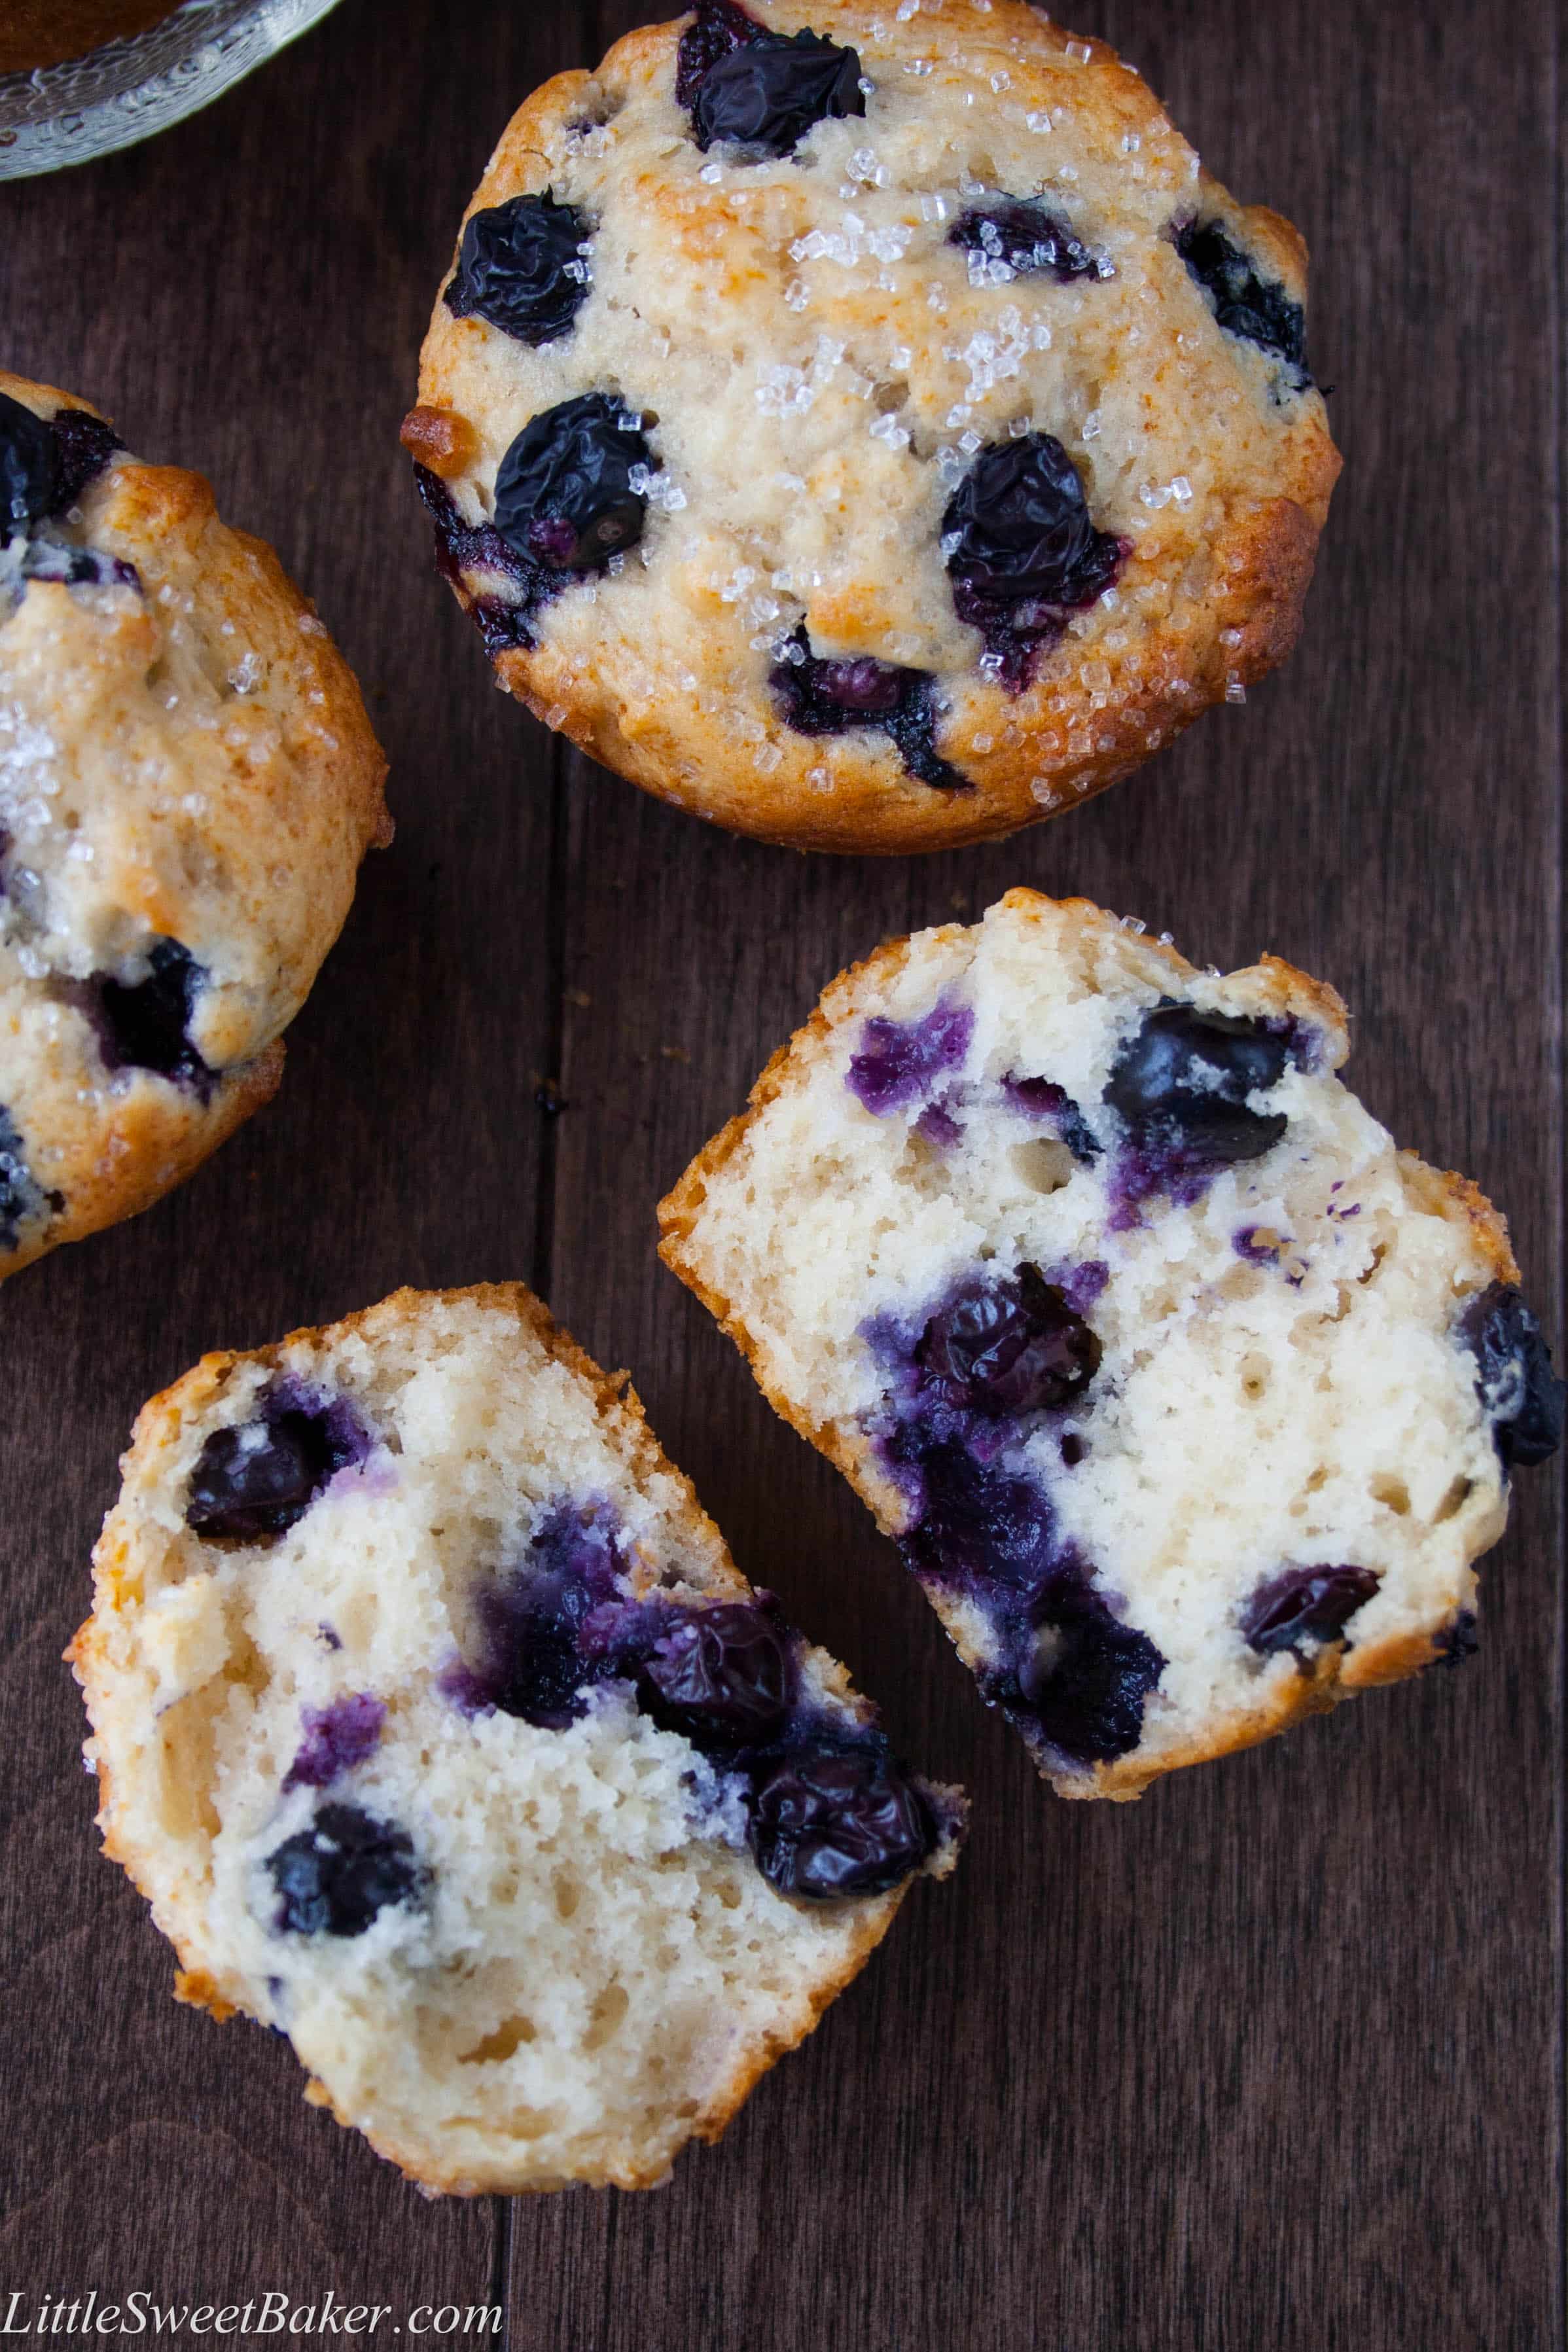 BLUEBERRY BUTTERMILK MUFFINS. A soft and moist muffin full of juicy blueberries and a scent of vanilla and cinnamon spice. This is a quick and easy go-to recipe for whenever you feel like homemade muffins.